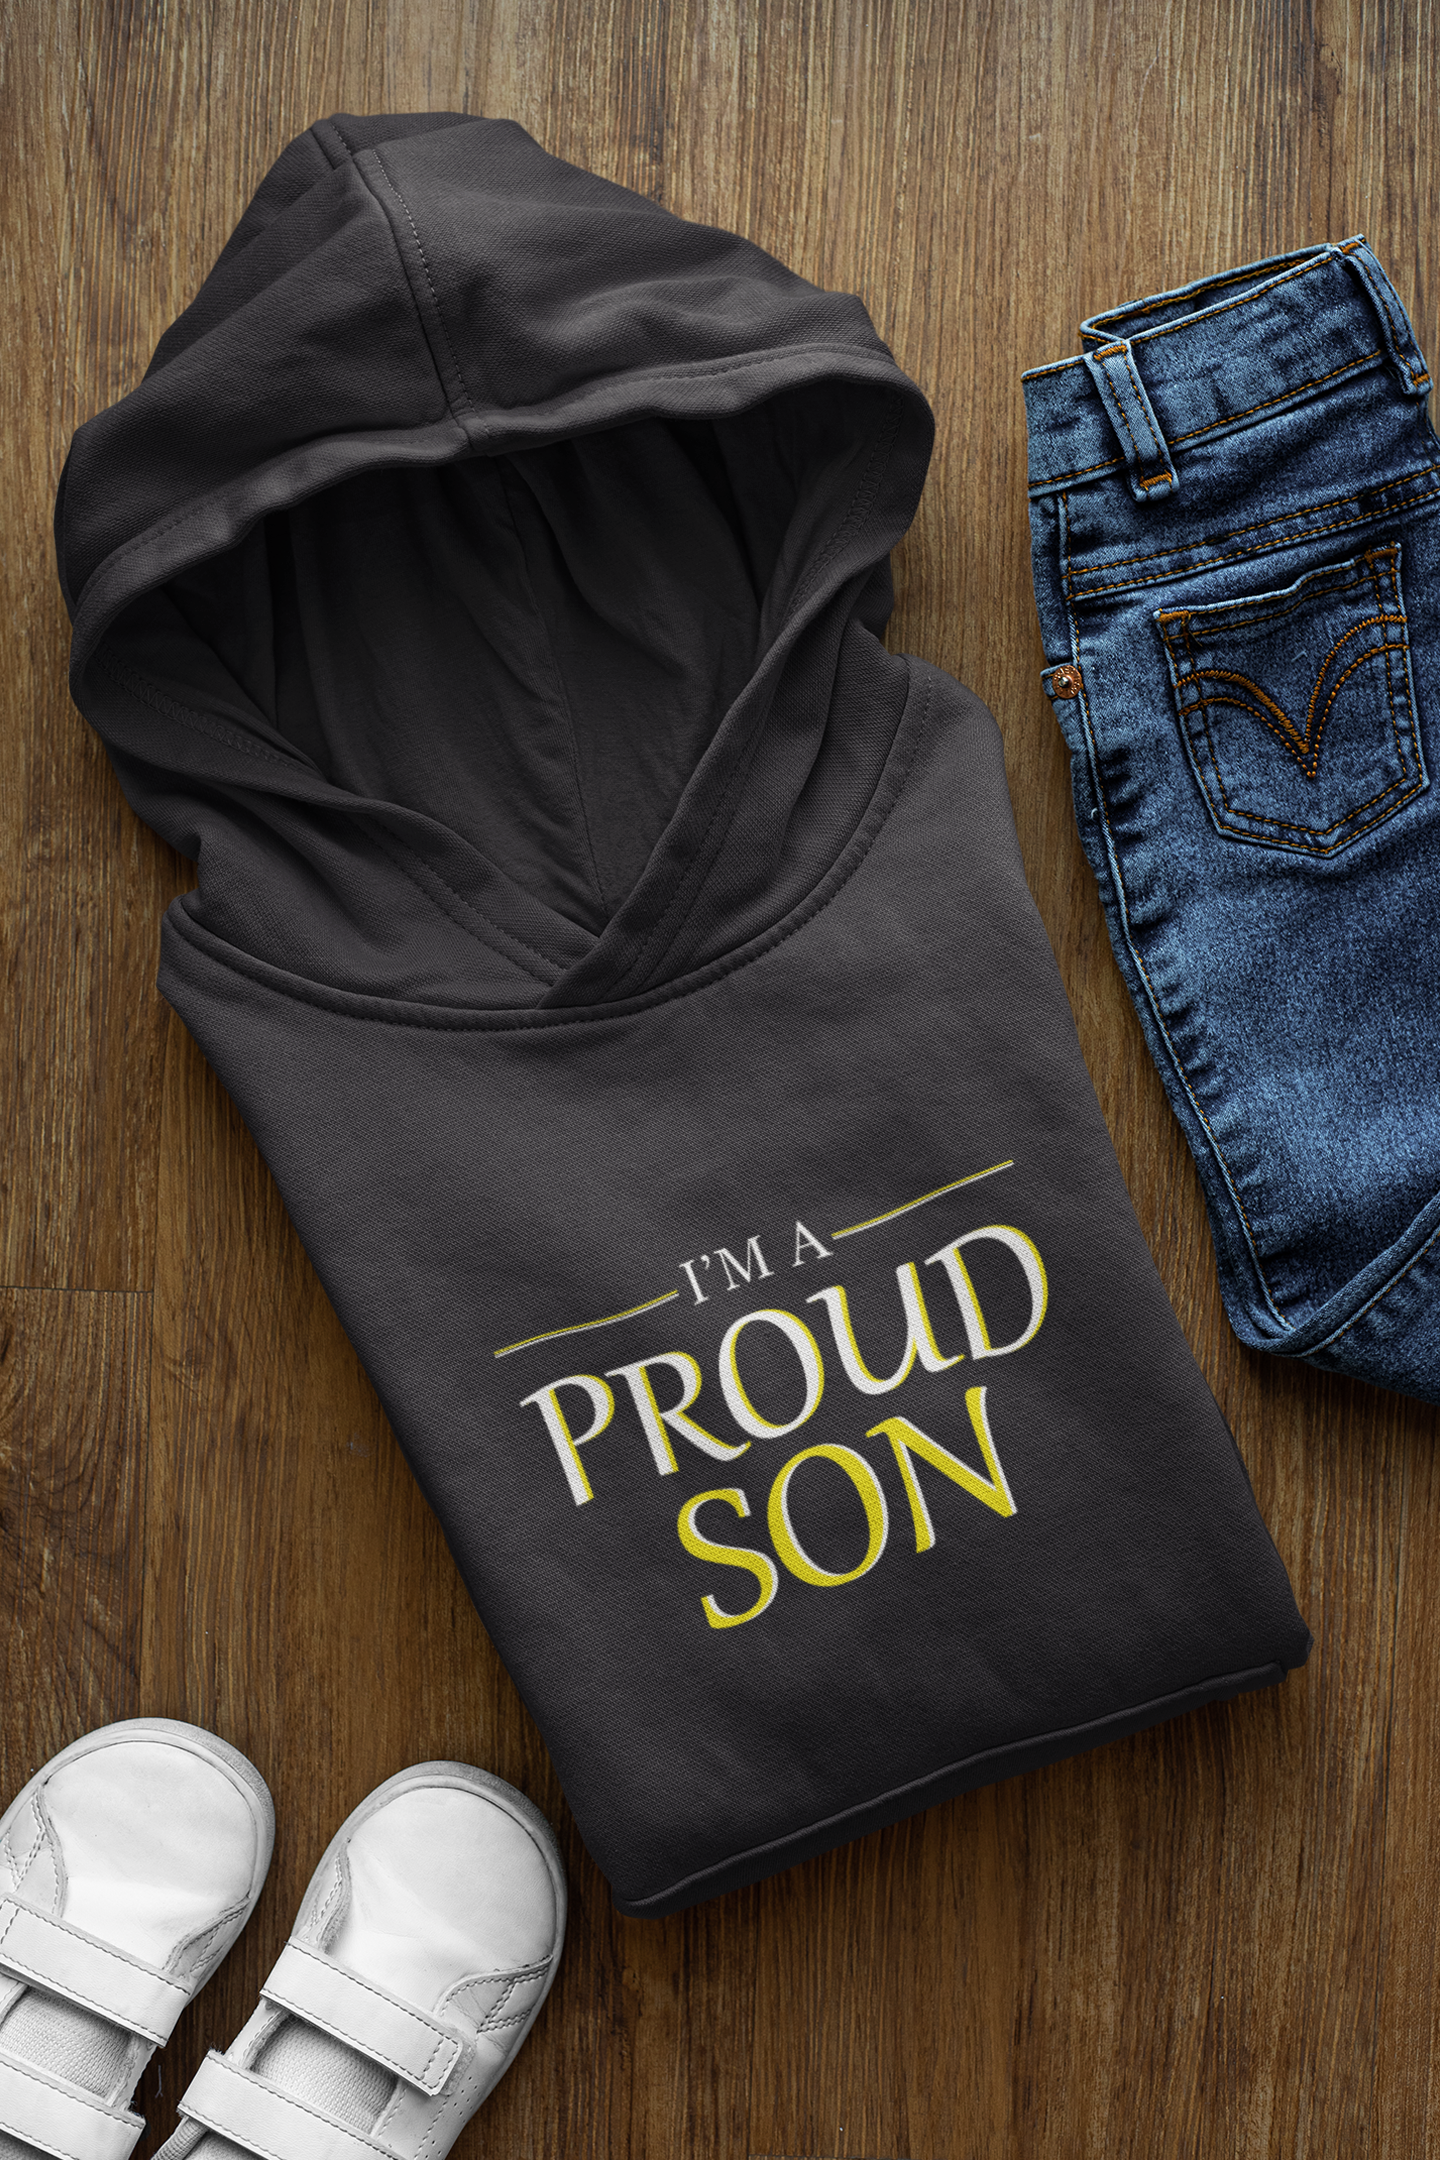 Proud Dad Father and Son Black Matching Hoodies- FunkyTeesClub